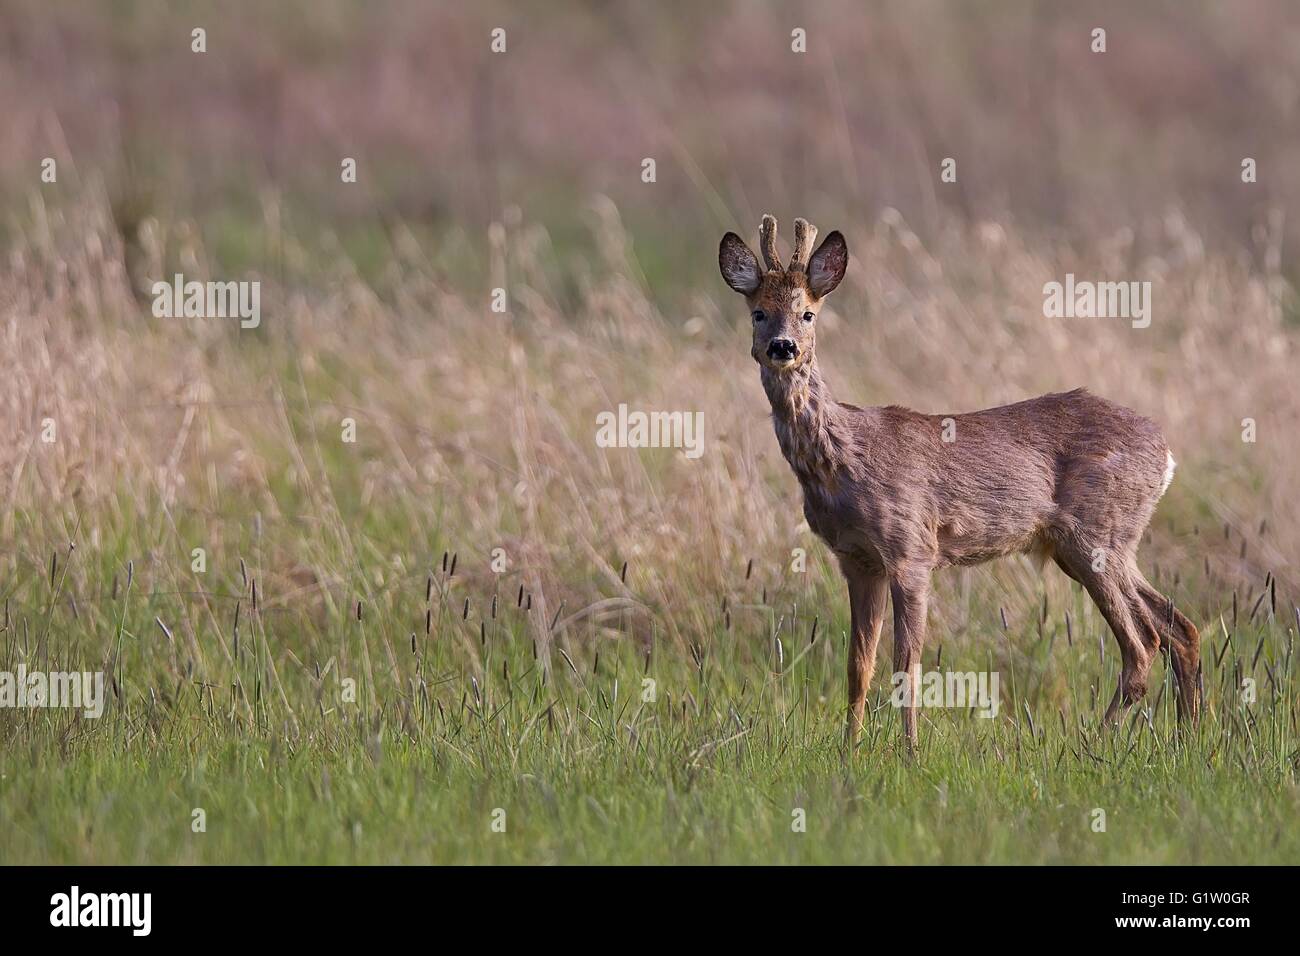 Buck deer in a clearing Stock Photo